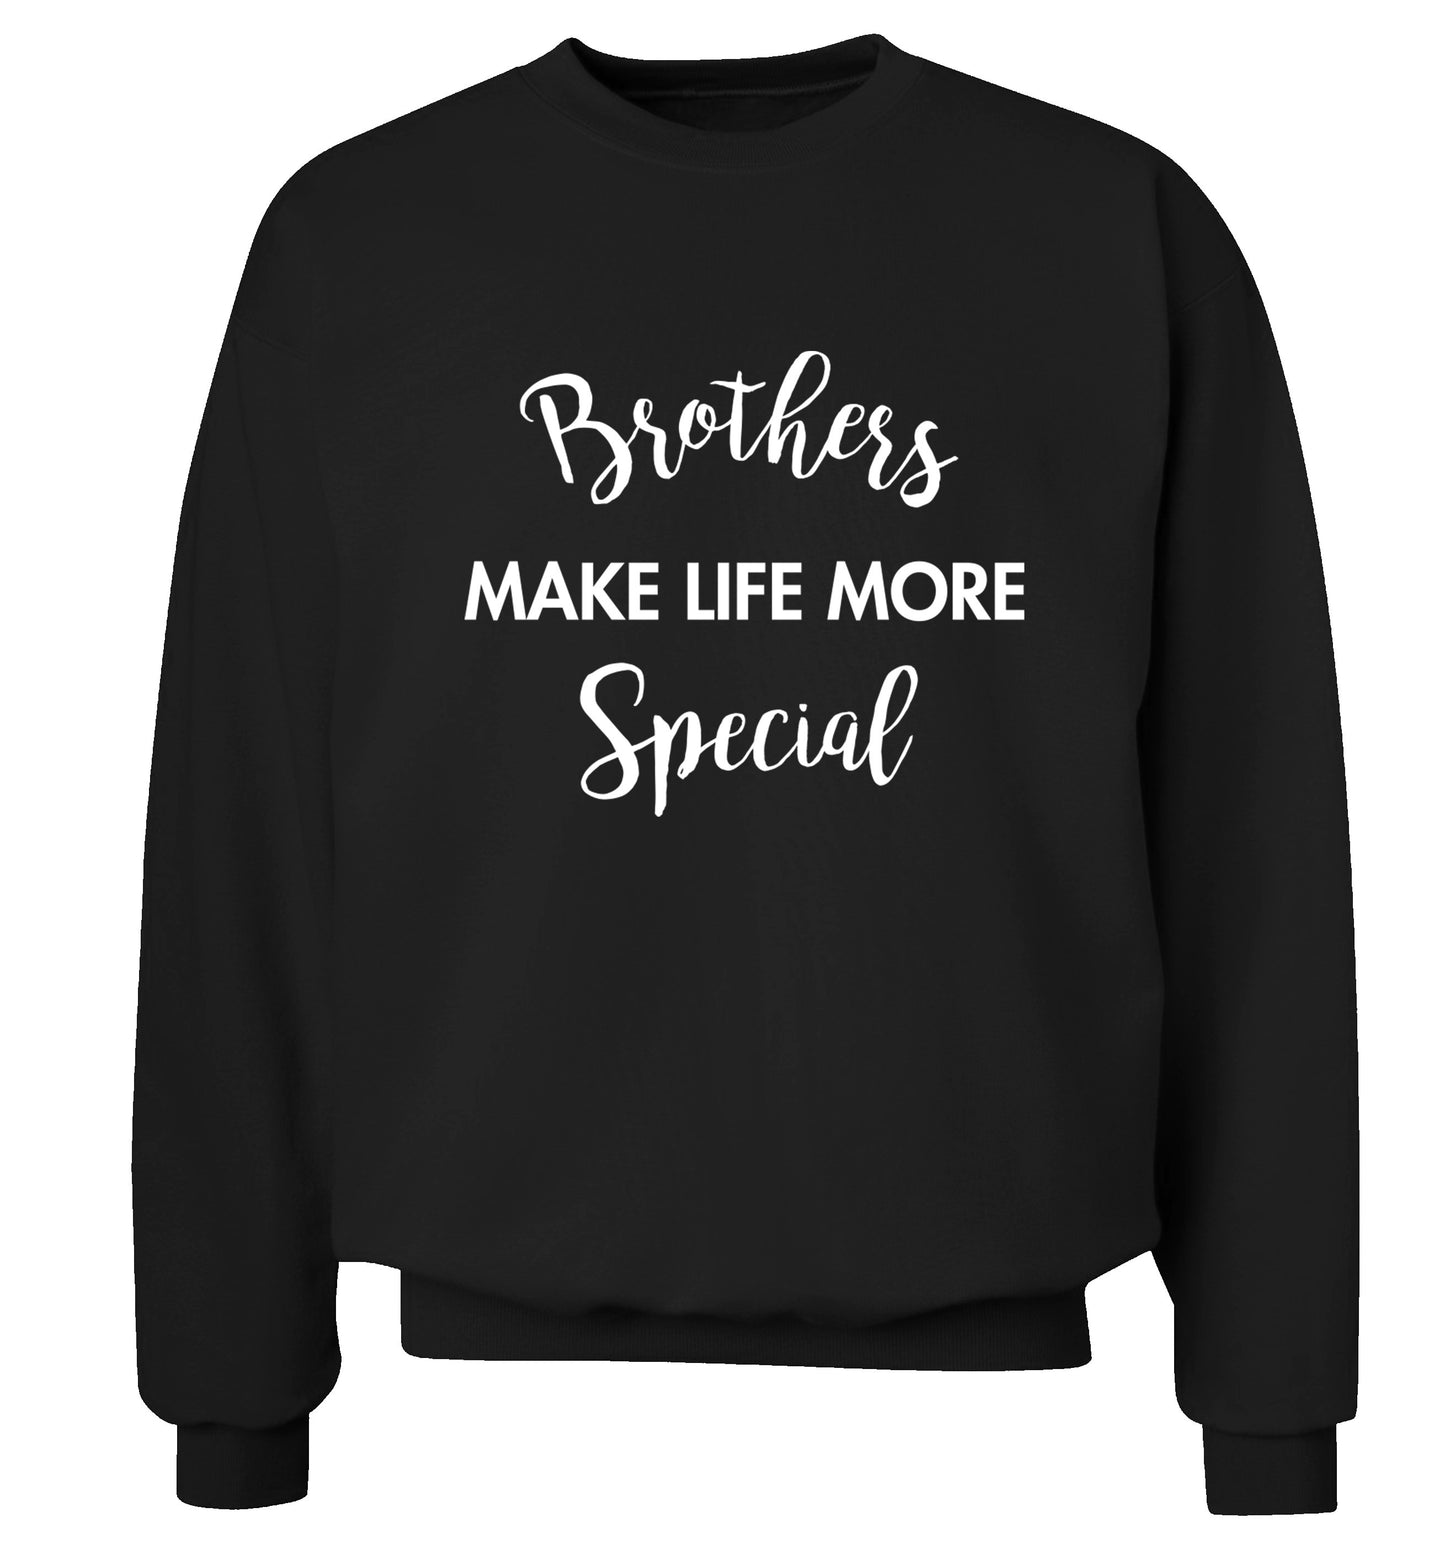 Brothers make life more special Adult's unisex black Sweater 2XL